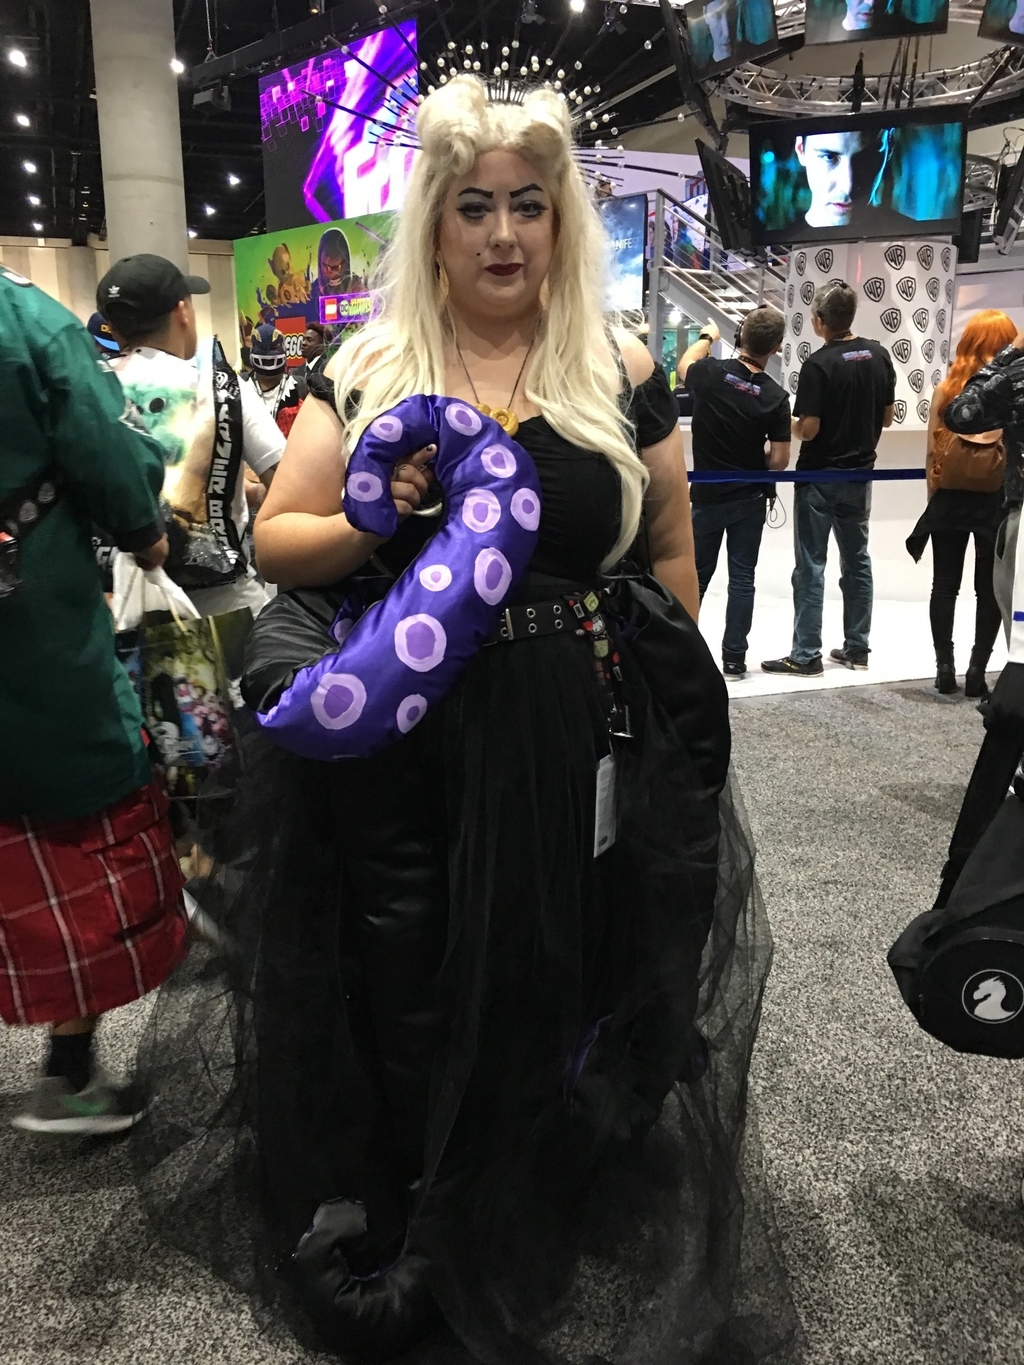 35 Well-Done Cosplays from 2018's Comic-Con